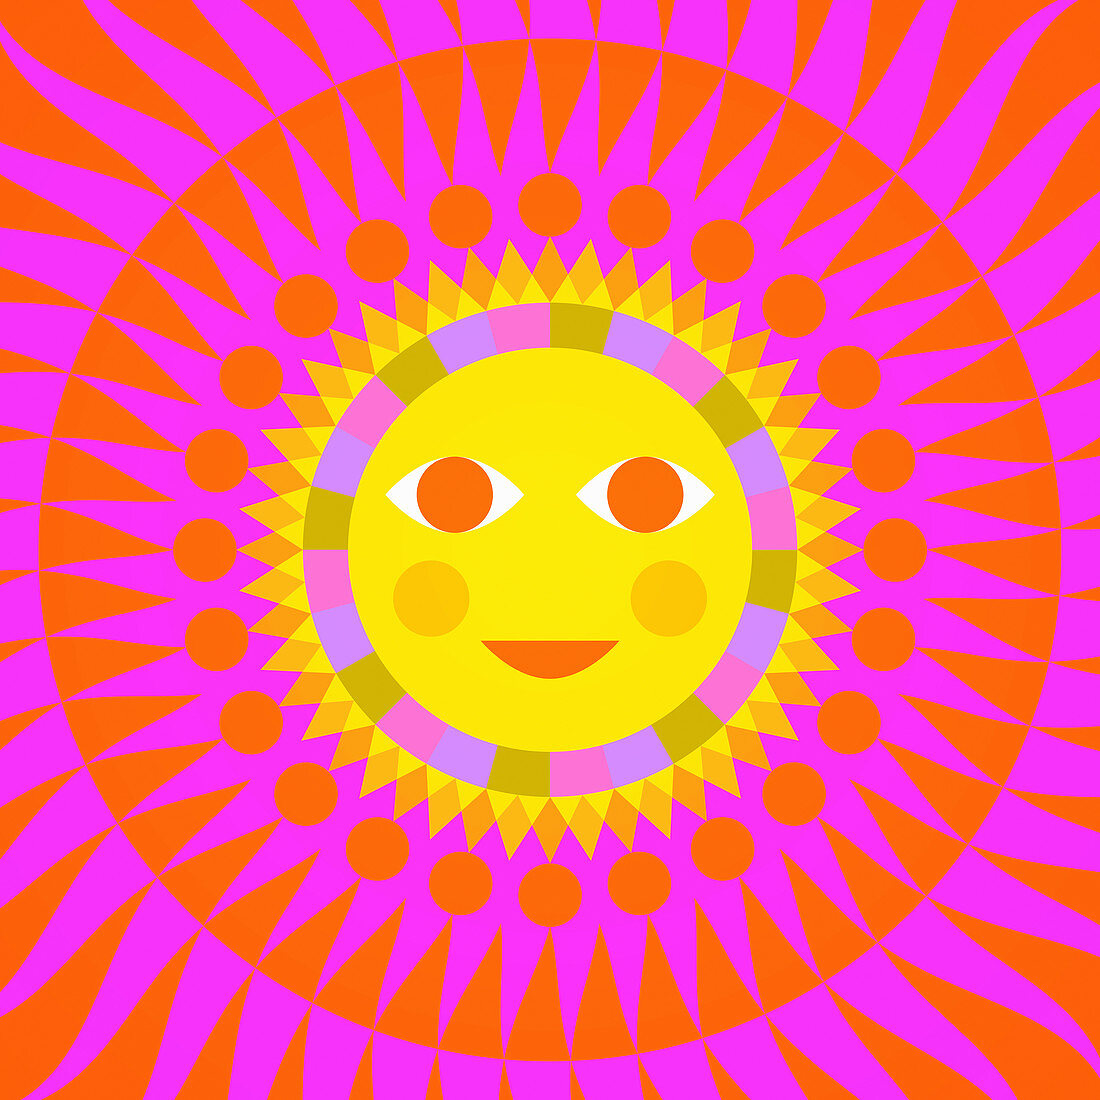 Sun with smiling face, illustration